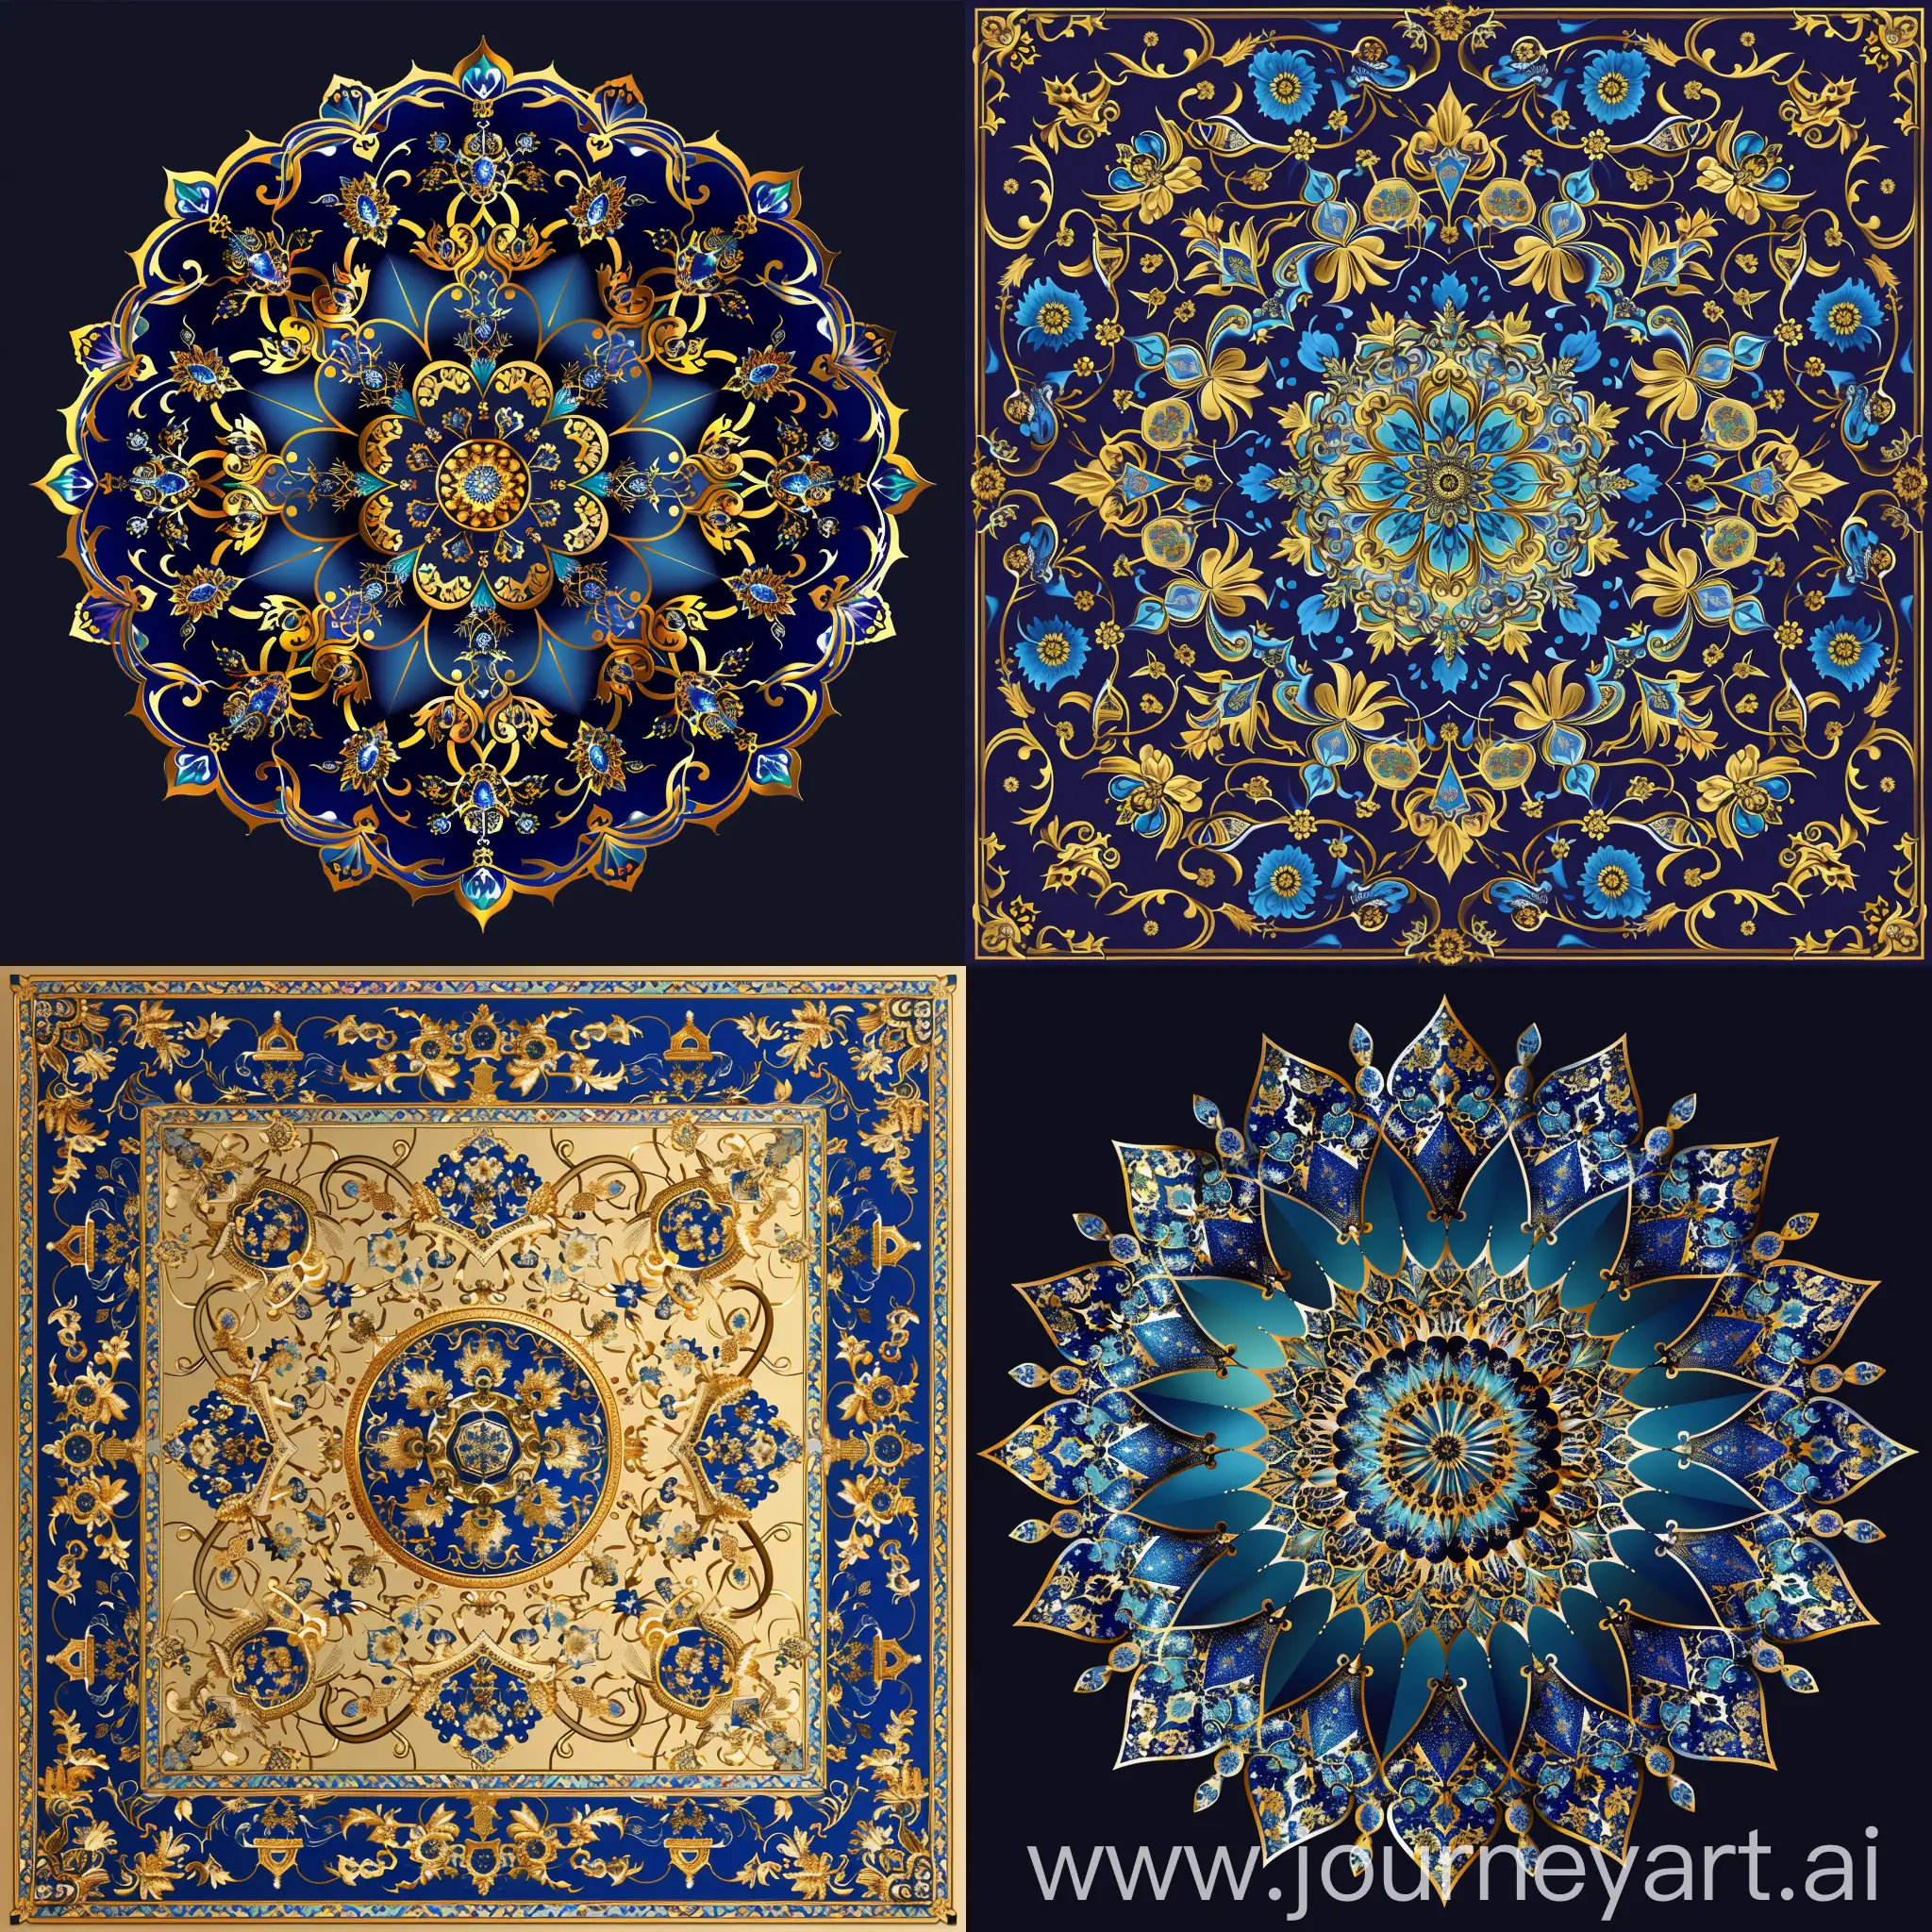 Exquisite-Iranian-Tazhib-Artwork-Intricate-Blue-and-Gold-Design